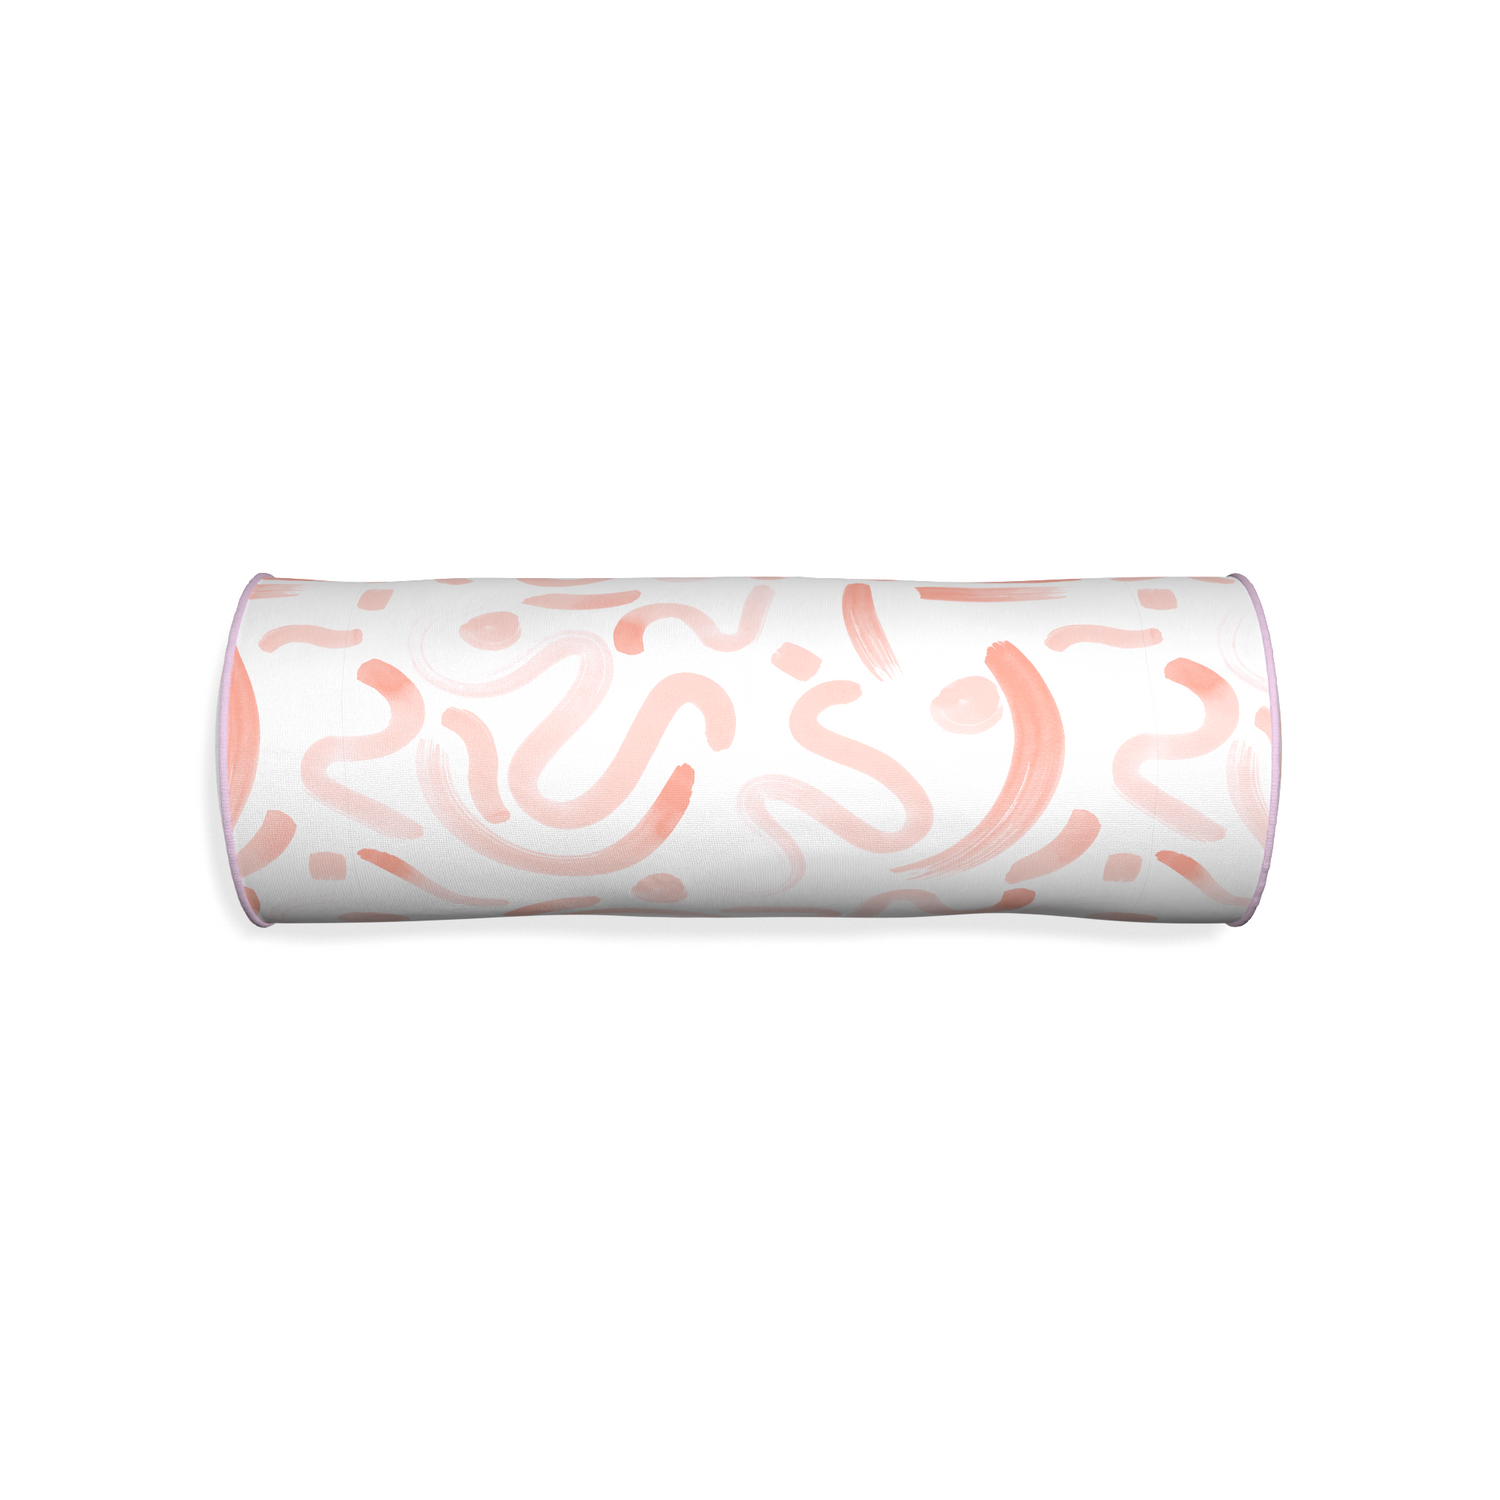 Bolster hockney pink custom pillow with l piping on white background